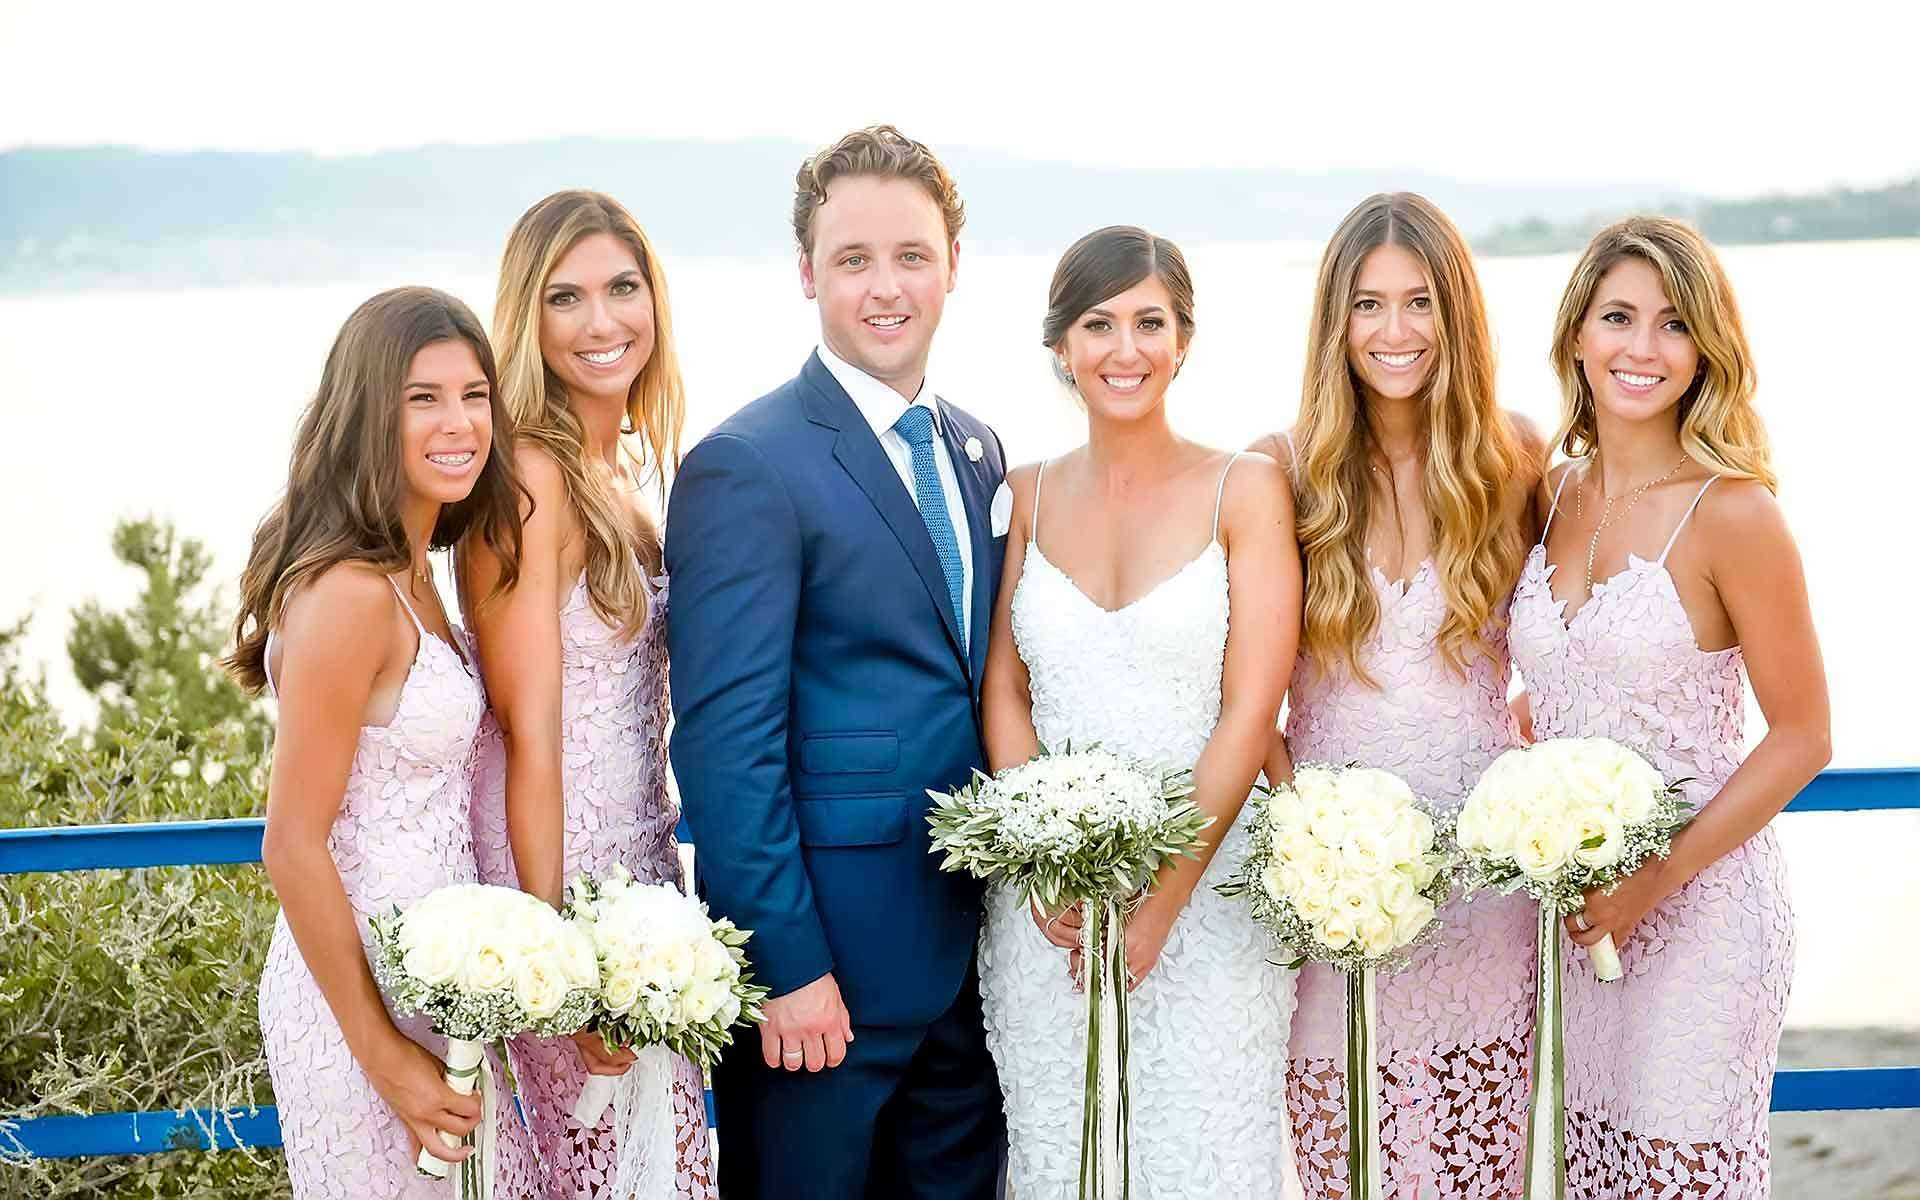 The-Couple-With-Their-Bridesmaid-Holding-Their-Wedding-Bouquets-With-White-Roses-With-Olive-Leaves-With-Olive-Leaves